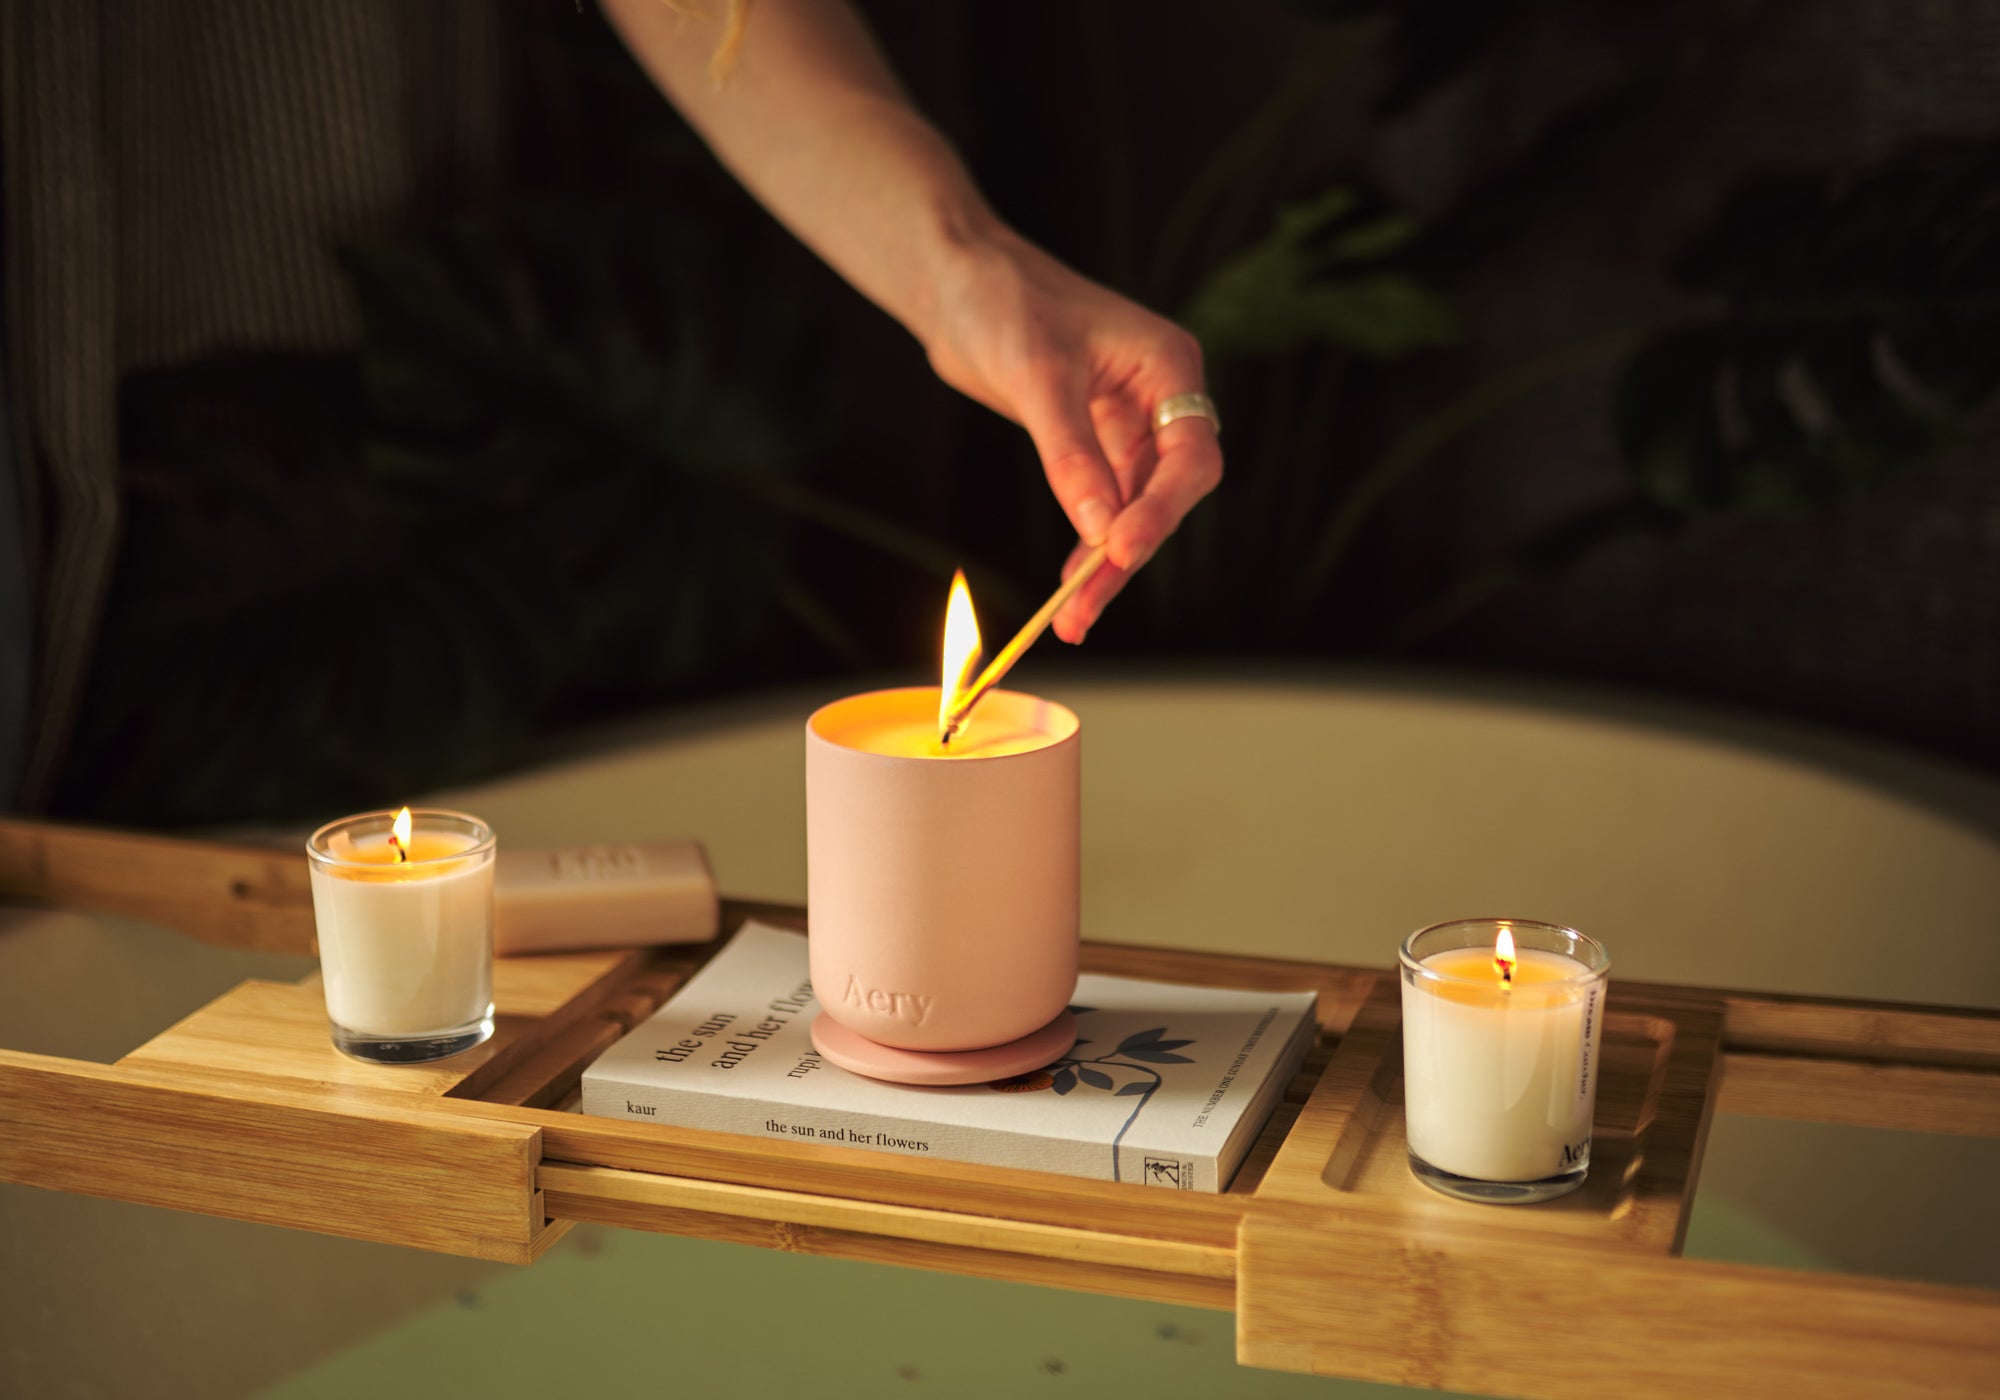 bath caddy with three lit candles and book